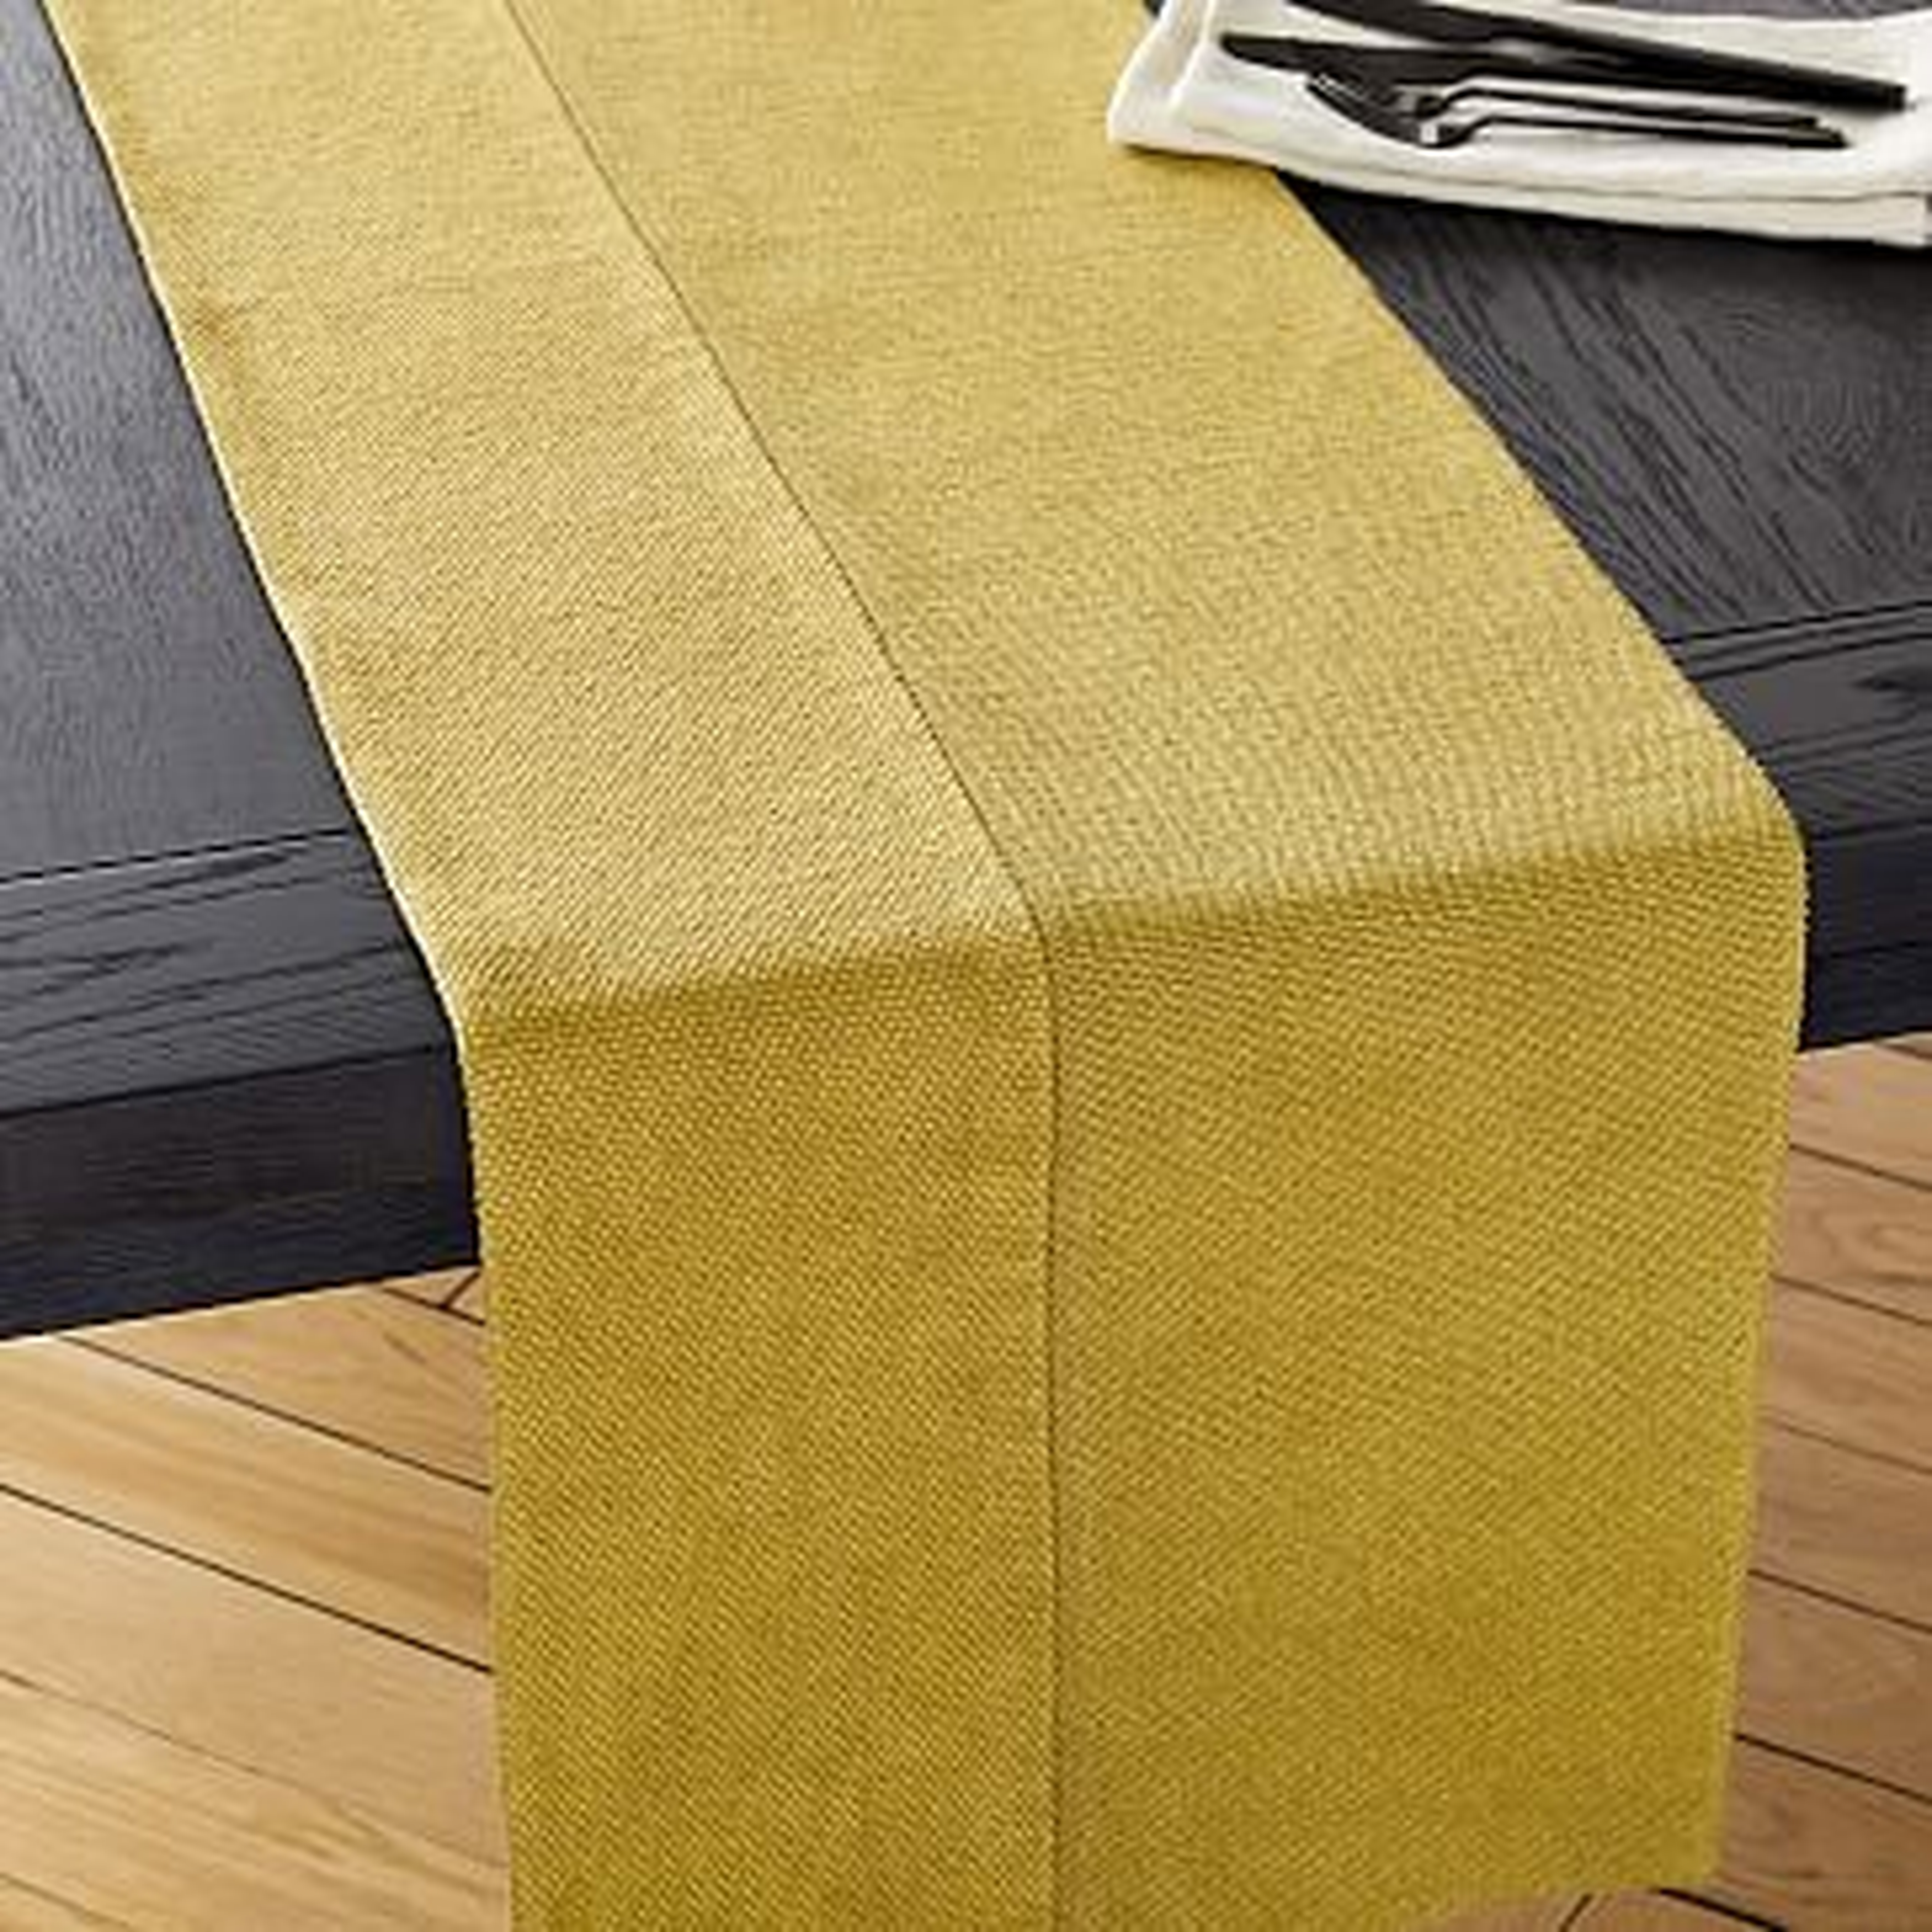 Cotton Canvas Table Table Runner, Wasabi - West Elm